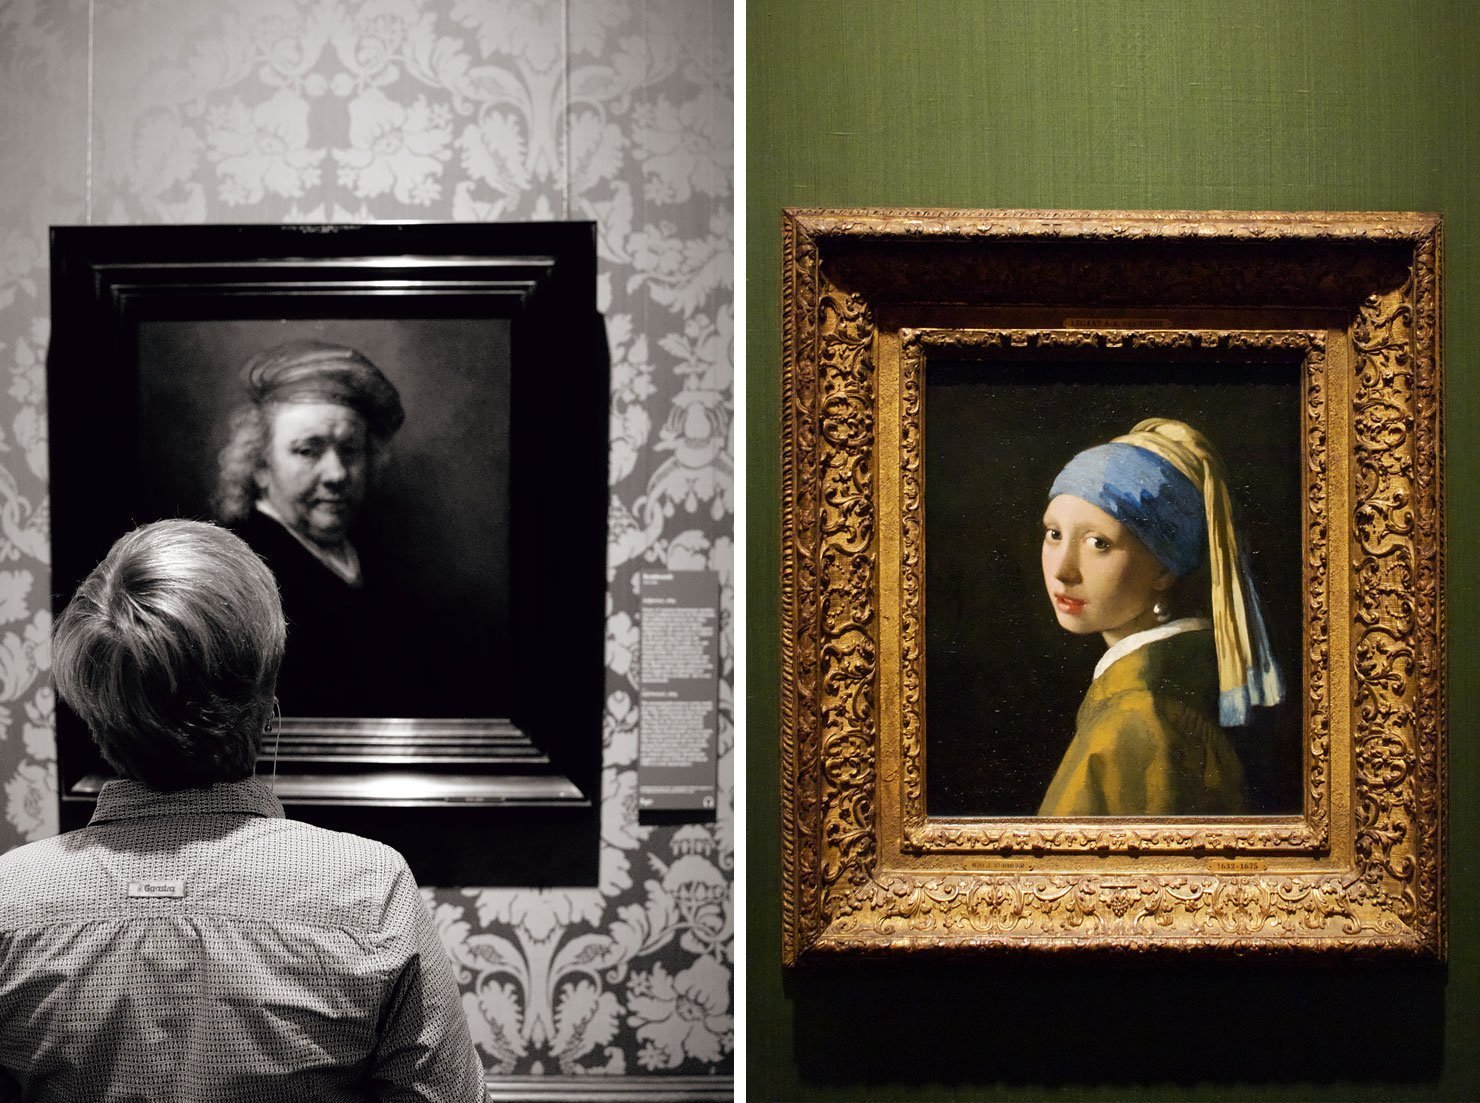 Mauritshuis museum in Den Haag with paintings by Rembrandt and Vermeer (Girl with the Pearl Earring)